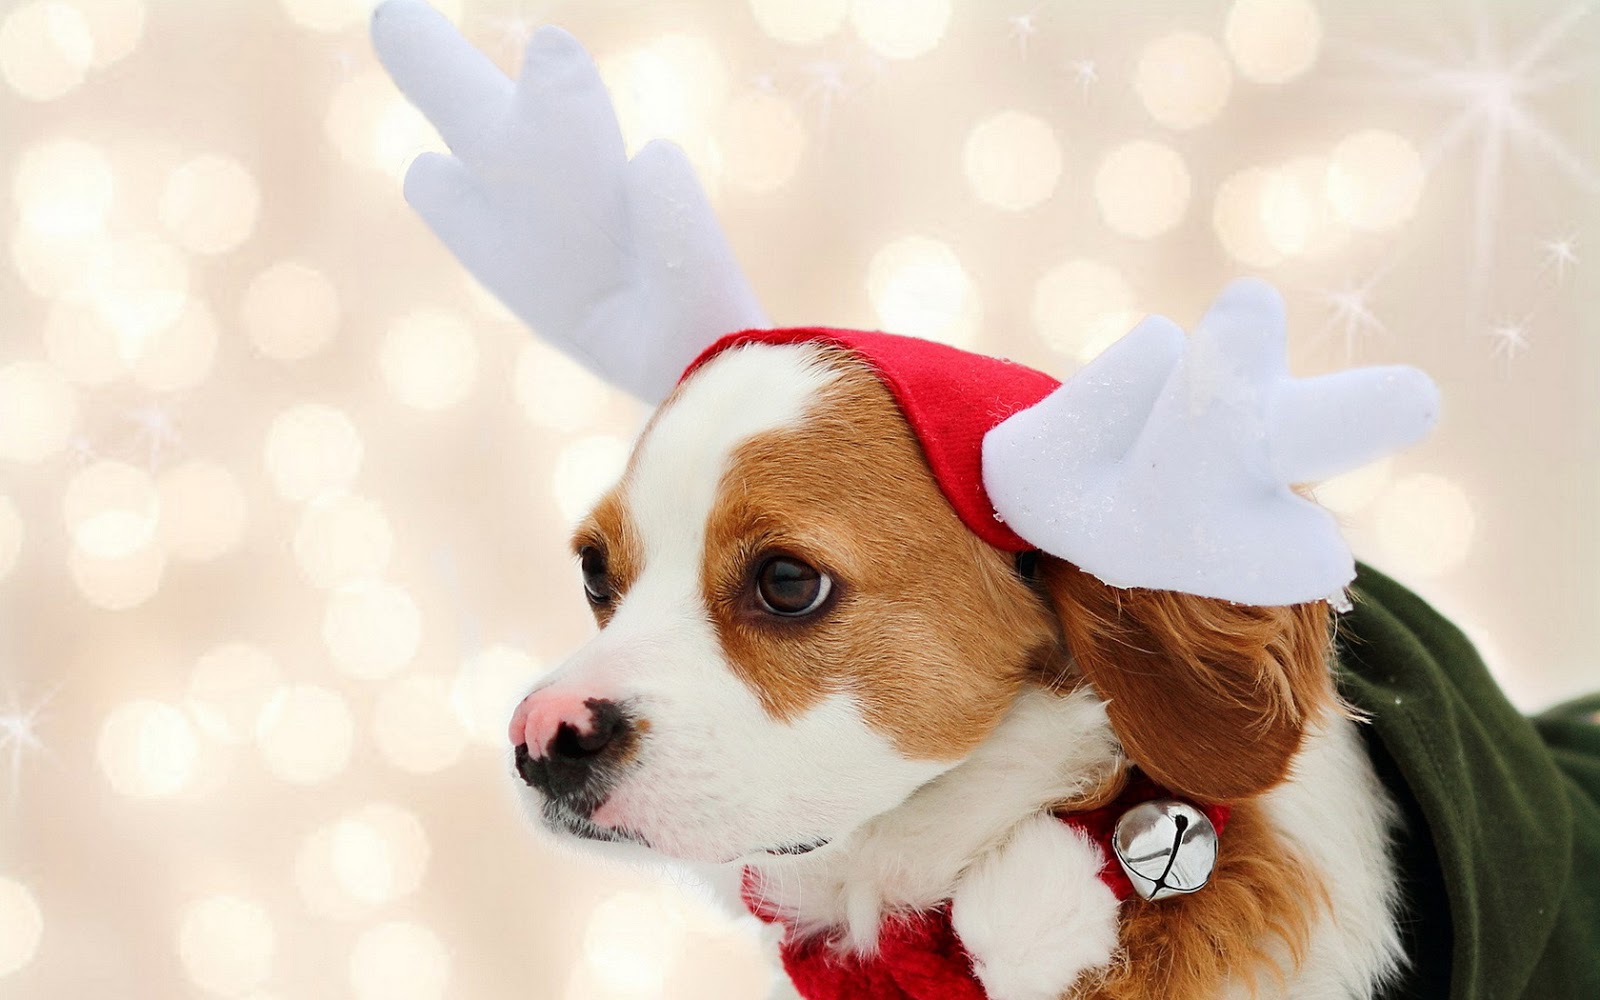 Download wallpaper for 2560x1440 resolution | Holidays, Cute, Dog ...